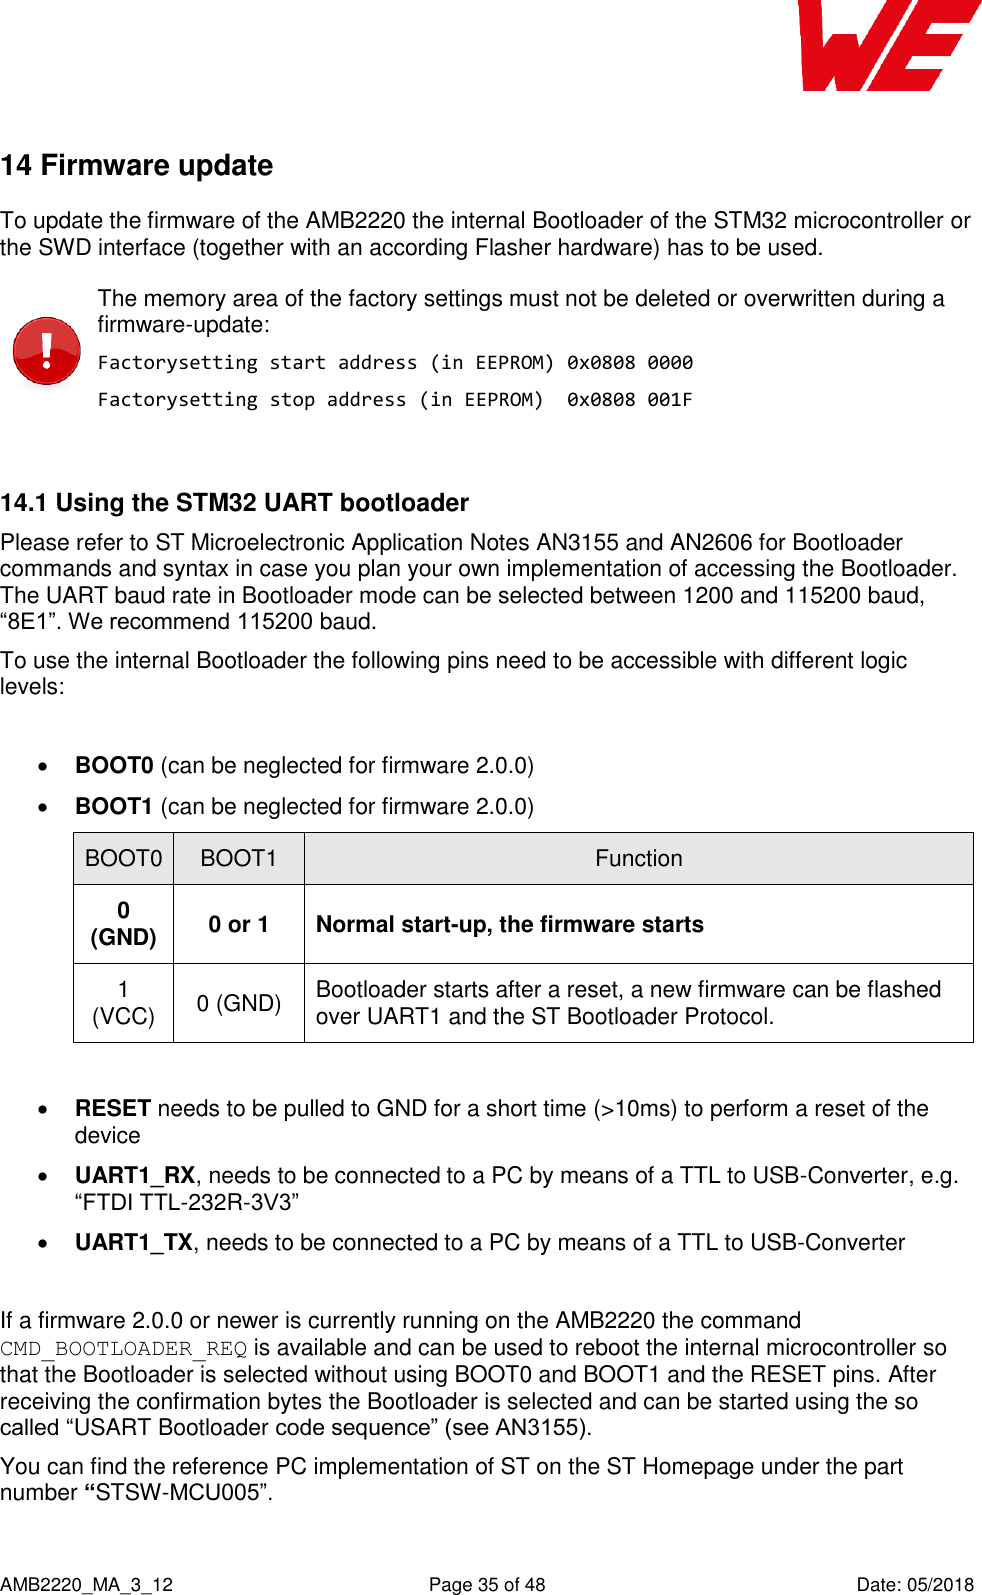    AMB2220_MA_3_12  Page 35 of 48  Date: 05/2018 14 Firmware update To update the firmware of the AMB2220 the internal Bootloader of the STM32 microcontroller or the SWD interface (together with an according Flasher hardware) has to be used.  The memory area of the factory settings must not be deleted or overwritten during a firmware-update: Factorysetting start address (in EEPROM) 0x0808 0000 Factorysetting stop address (in EEPROM)  0x0808 001F  14.1 Using the STM32 UART bootloader Please refer to ST Microelectronic Application Notes AN3155 and AN2606 for Bootloader commands and syntax in case you plan your own implementation of accessing the Bootloader. The UART baud rate in Bootloader mode can be selected between 1200 and 115200 baud, “8E1”. We recommend 115200 baud. To use the internal Bootloader the following pins need to be accessible with different logic levels:   BOOT0 (can be neglected for firmware 2.0.0)  BOOT1 (can be neglected for firmware 2.0.0) BOOT0 BOOT1 Function 0 (GND) 0 or 1 Normal start-up, the firmware starts 1 (VCC) 0 (GND) Bootloader starts after a reset, a new firmware can be flashed over UART1 and the ST Bootloader Protocol.   RESET needs to be pulled to GND for a short time (&gt;10ms) to perform a reset of the device  UART1_RX, needs to be connected to a PC by means of a TTL to USB-Converter, e.g. “FTDI TTL-232R-3V3”  UART1_TX, needs to be connected to a PC by means of a TTL to USB-Converter  If a firmware 2.0.0 or newer is currently running on the AMB2220 the command CMD_BOOTLOADER_REQ is available and can be used to reboot the internal microcontroller so that the Bootloader is selected without using BOOT0 and BOOT1 and the RESET pins. After receiving the confirmation bytes the Bootloader is selected and can be started using the so called “USART Bootloader code sequence” (see AN3155). You can find the reference PC implementation of ST on the ST Homepage under the part number “STSW-MCU005”. 